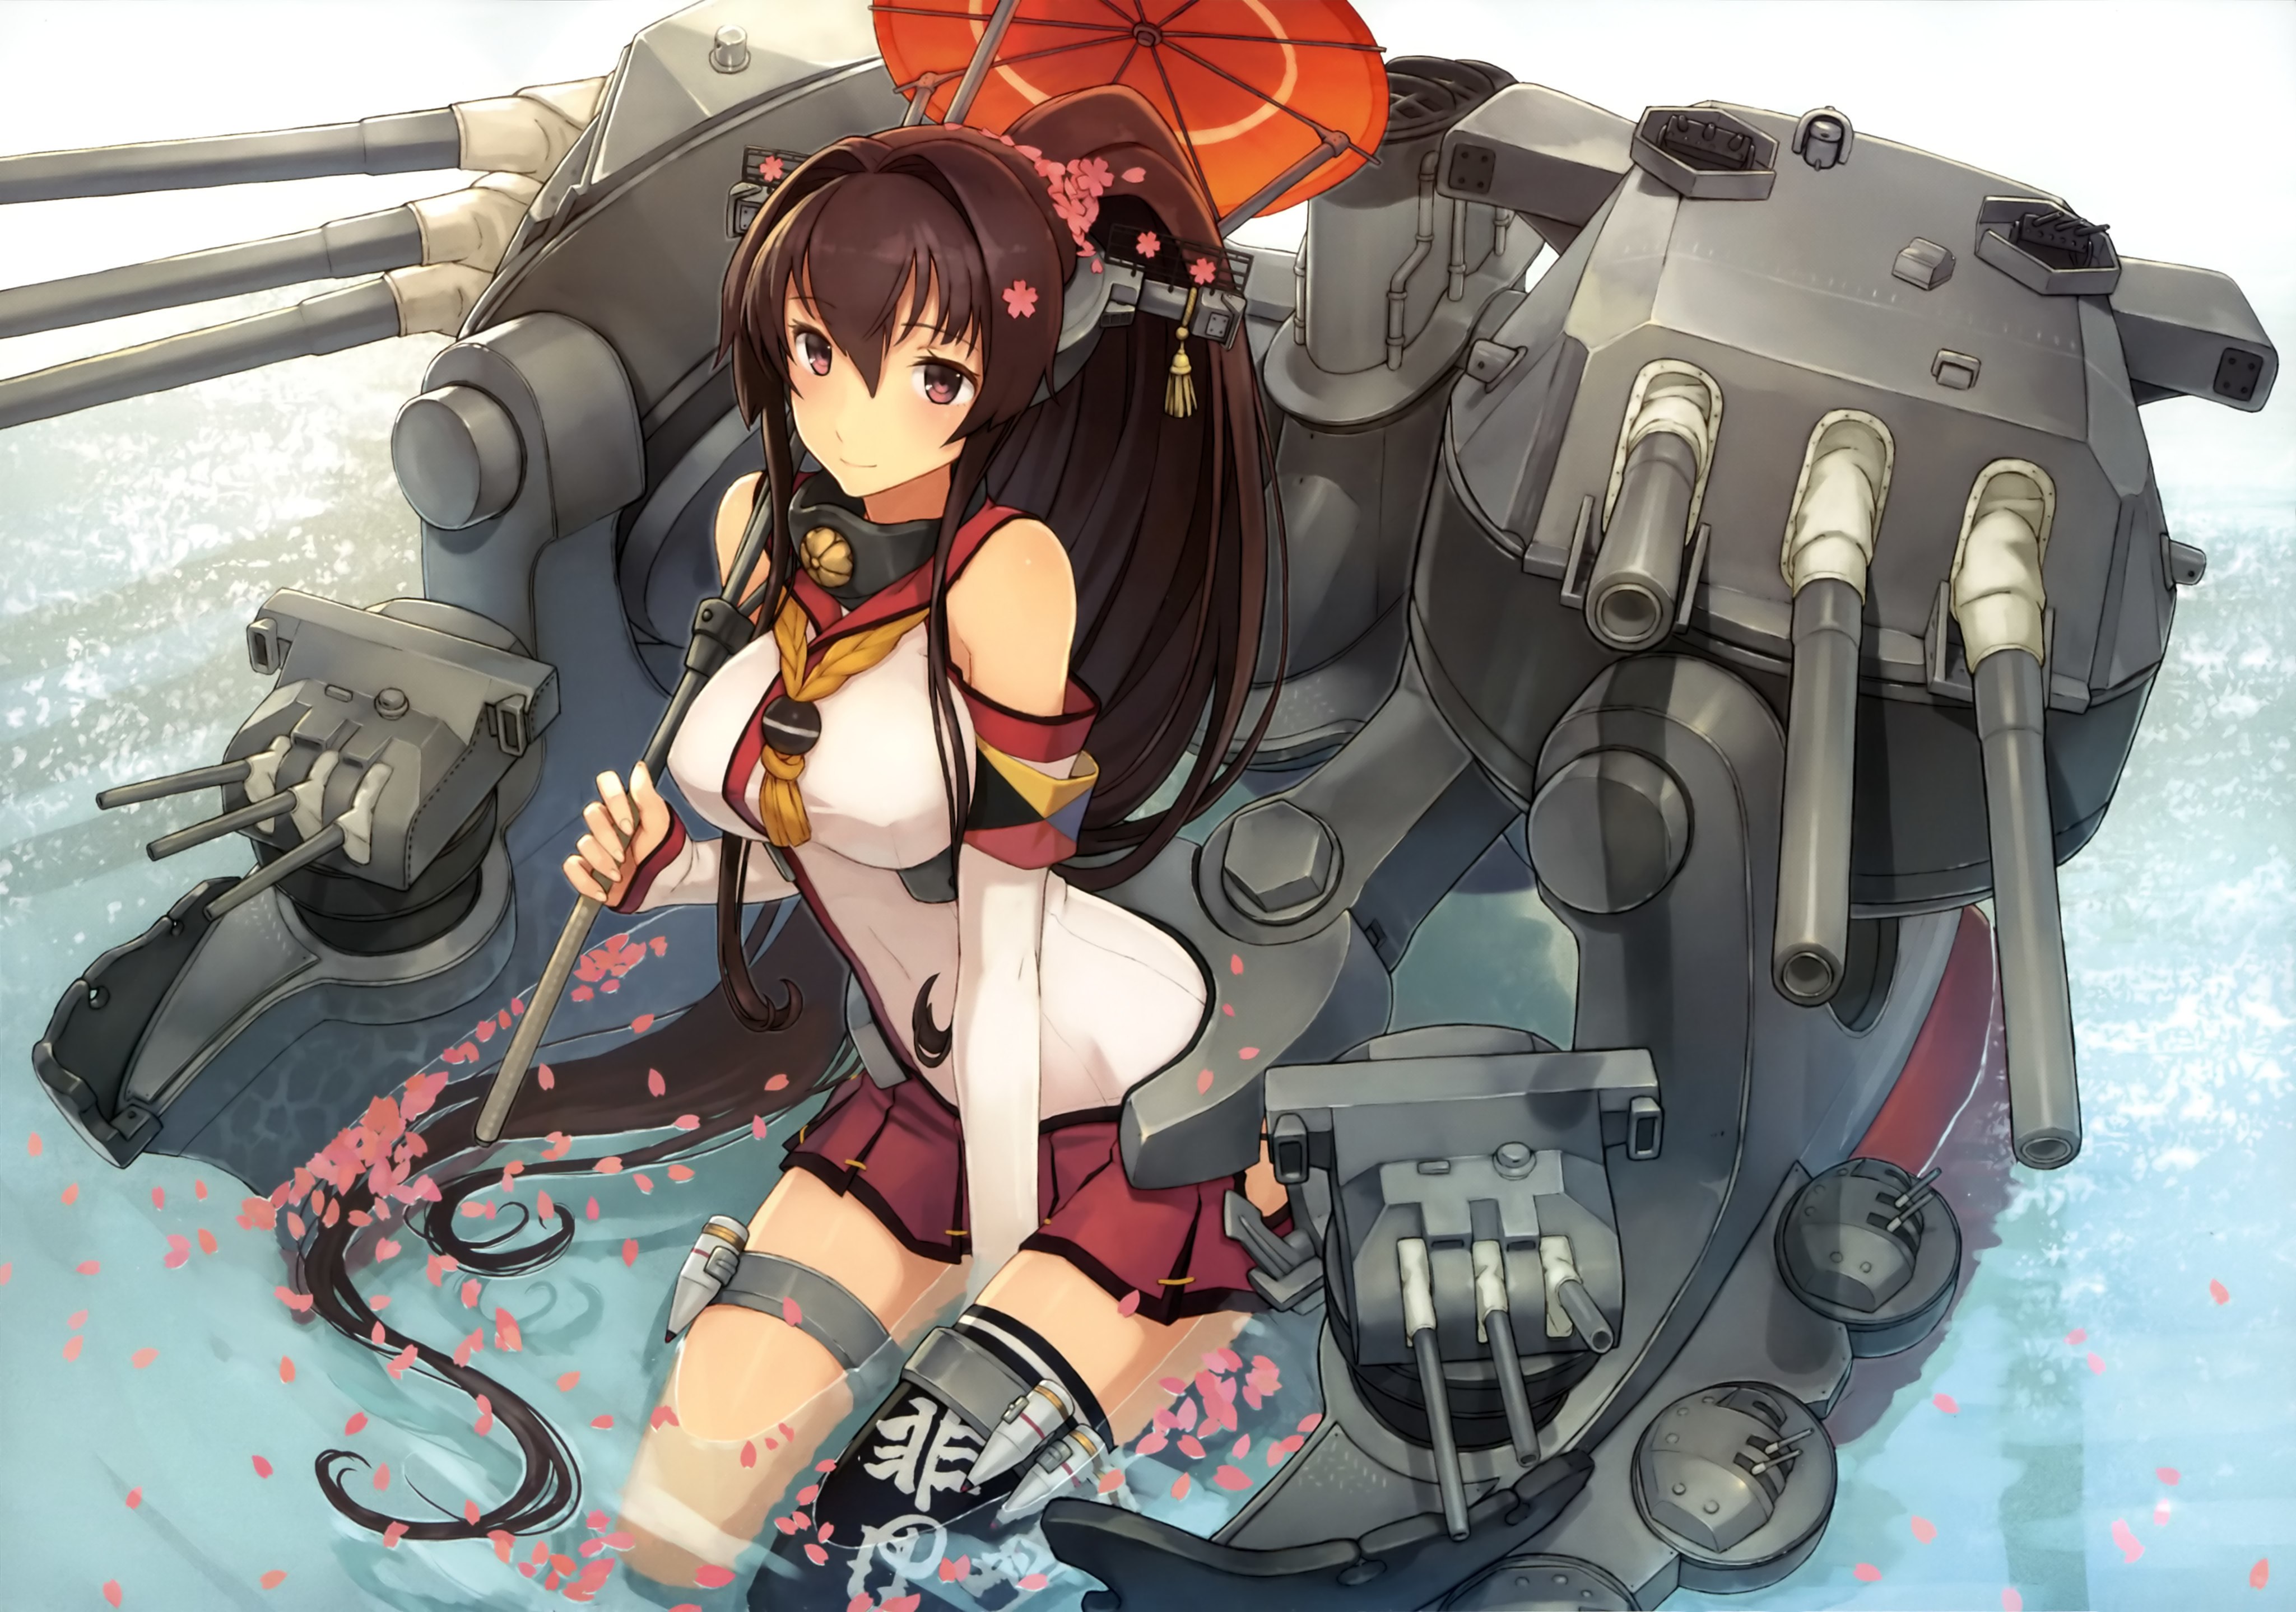 Kancolle collection. Ямато КАНКОЛЛЕ. Ямато Кантай. Kantai collection Yamato. Kantai collection Ямато.